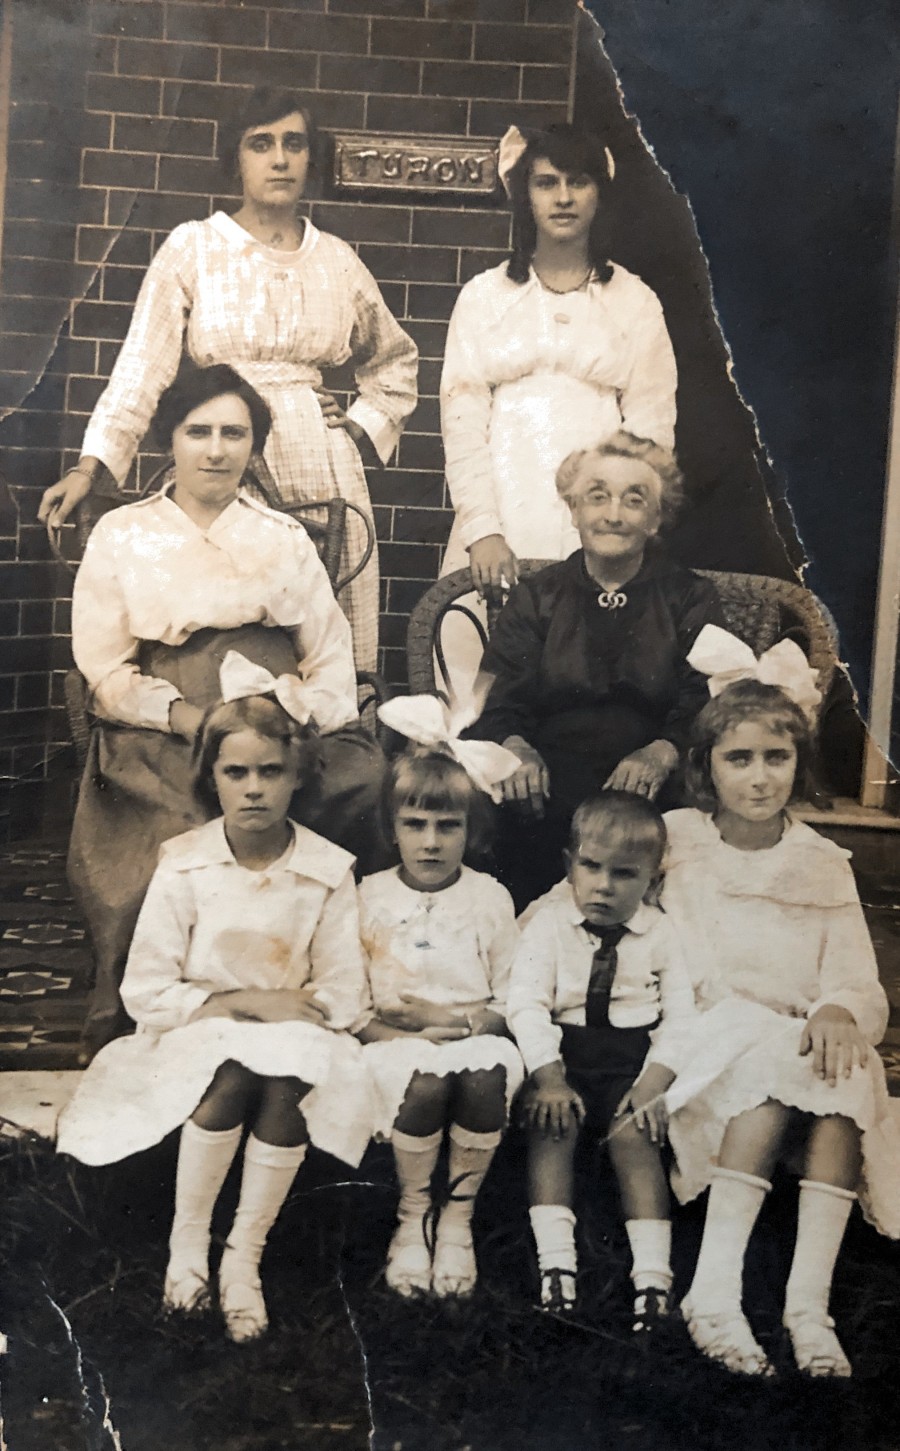 'Trewins at Turon' (Clockwise from top left) Gladys, Doris, Sarah Grace Moune (the nanny), Nellie, Ronnie, Mable, Marj and Grandma Carr (Note - Tom was absent for this photograph)